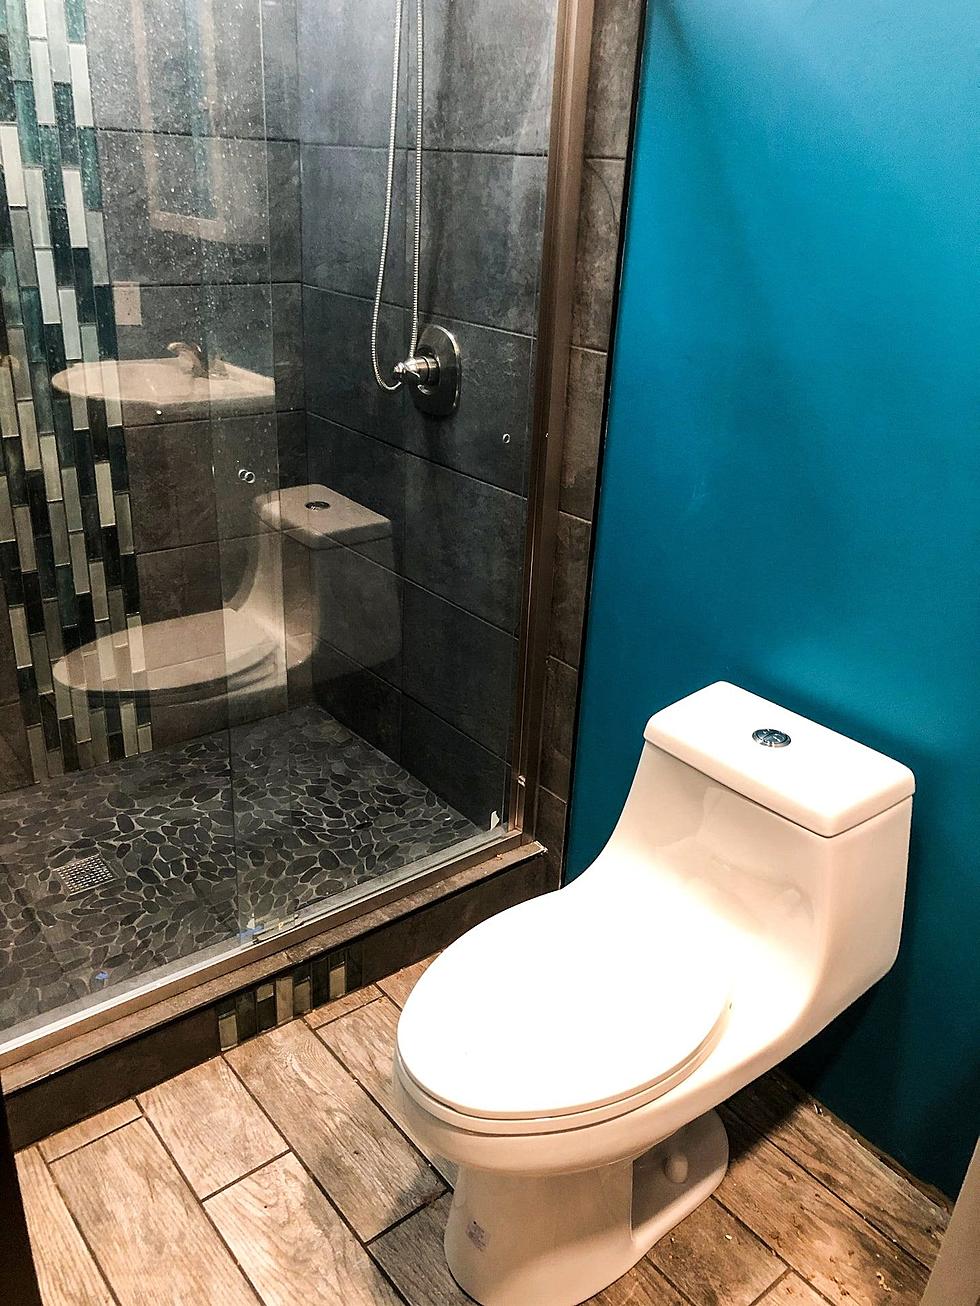 Disco toilet in an Airbnb : r/ATBGE